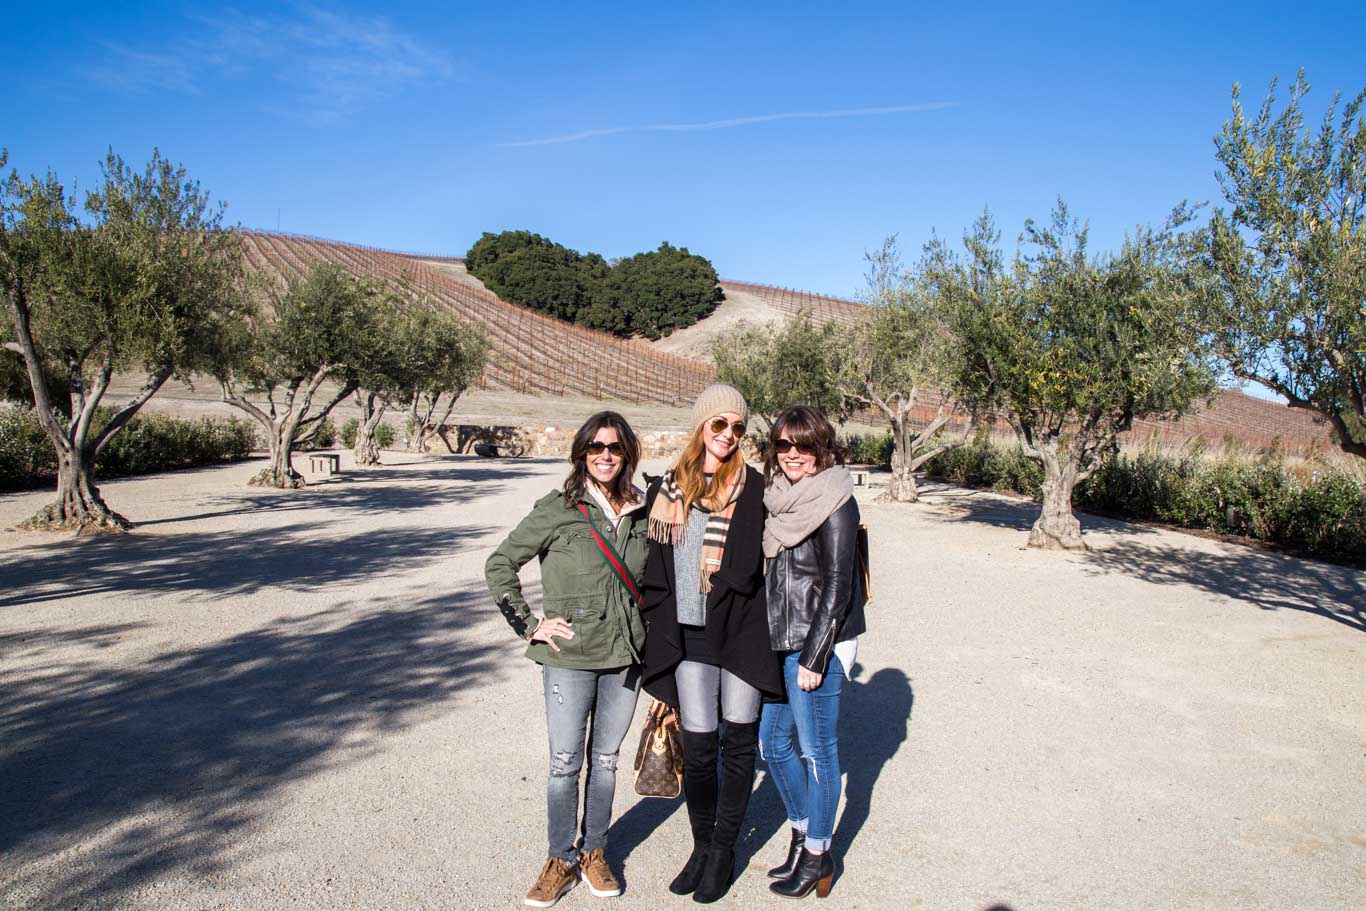 Heart formation at Niner West Estates - Wine tasting in Paso Robles 